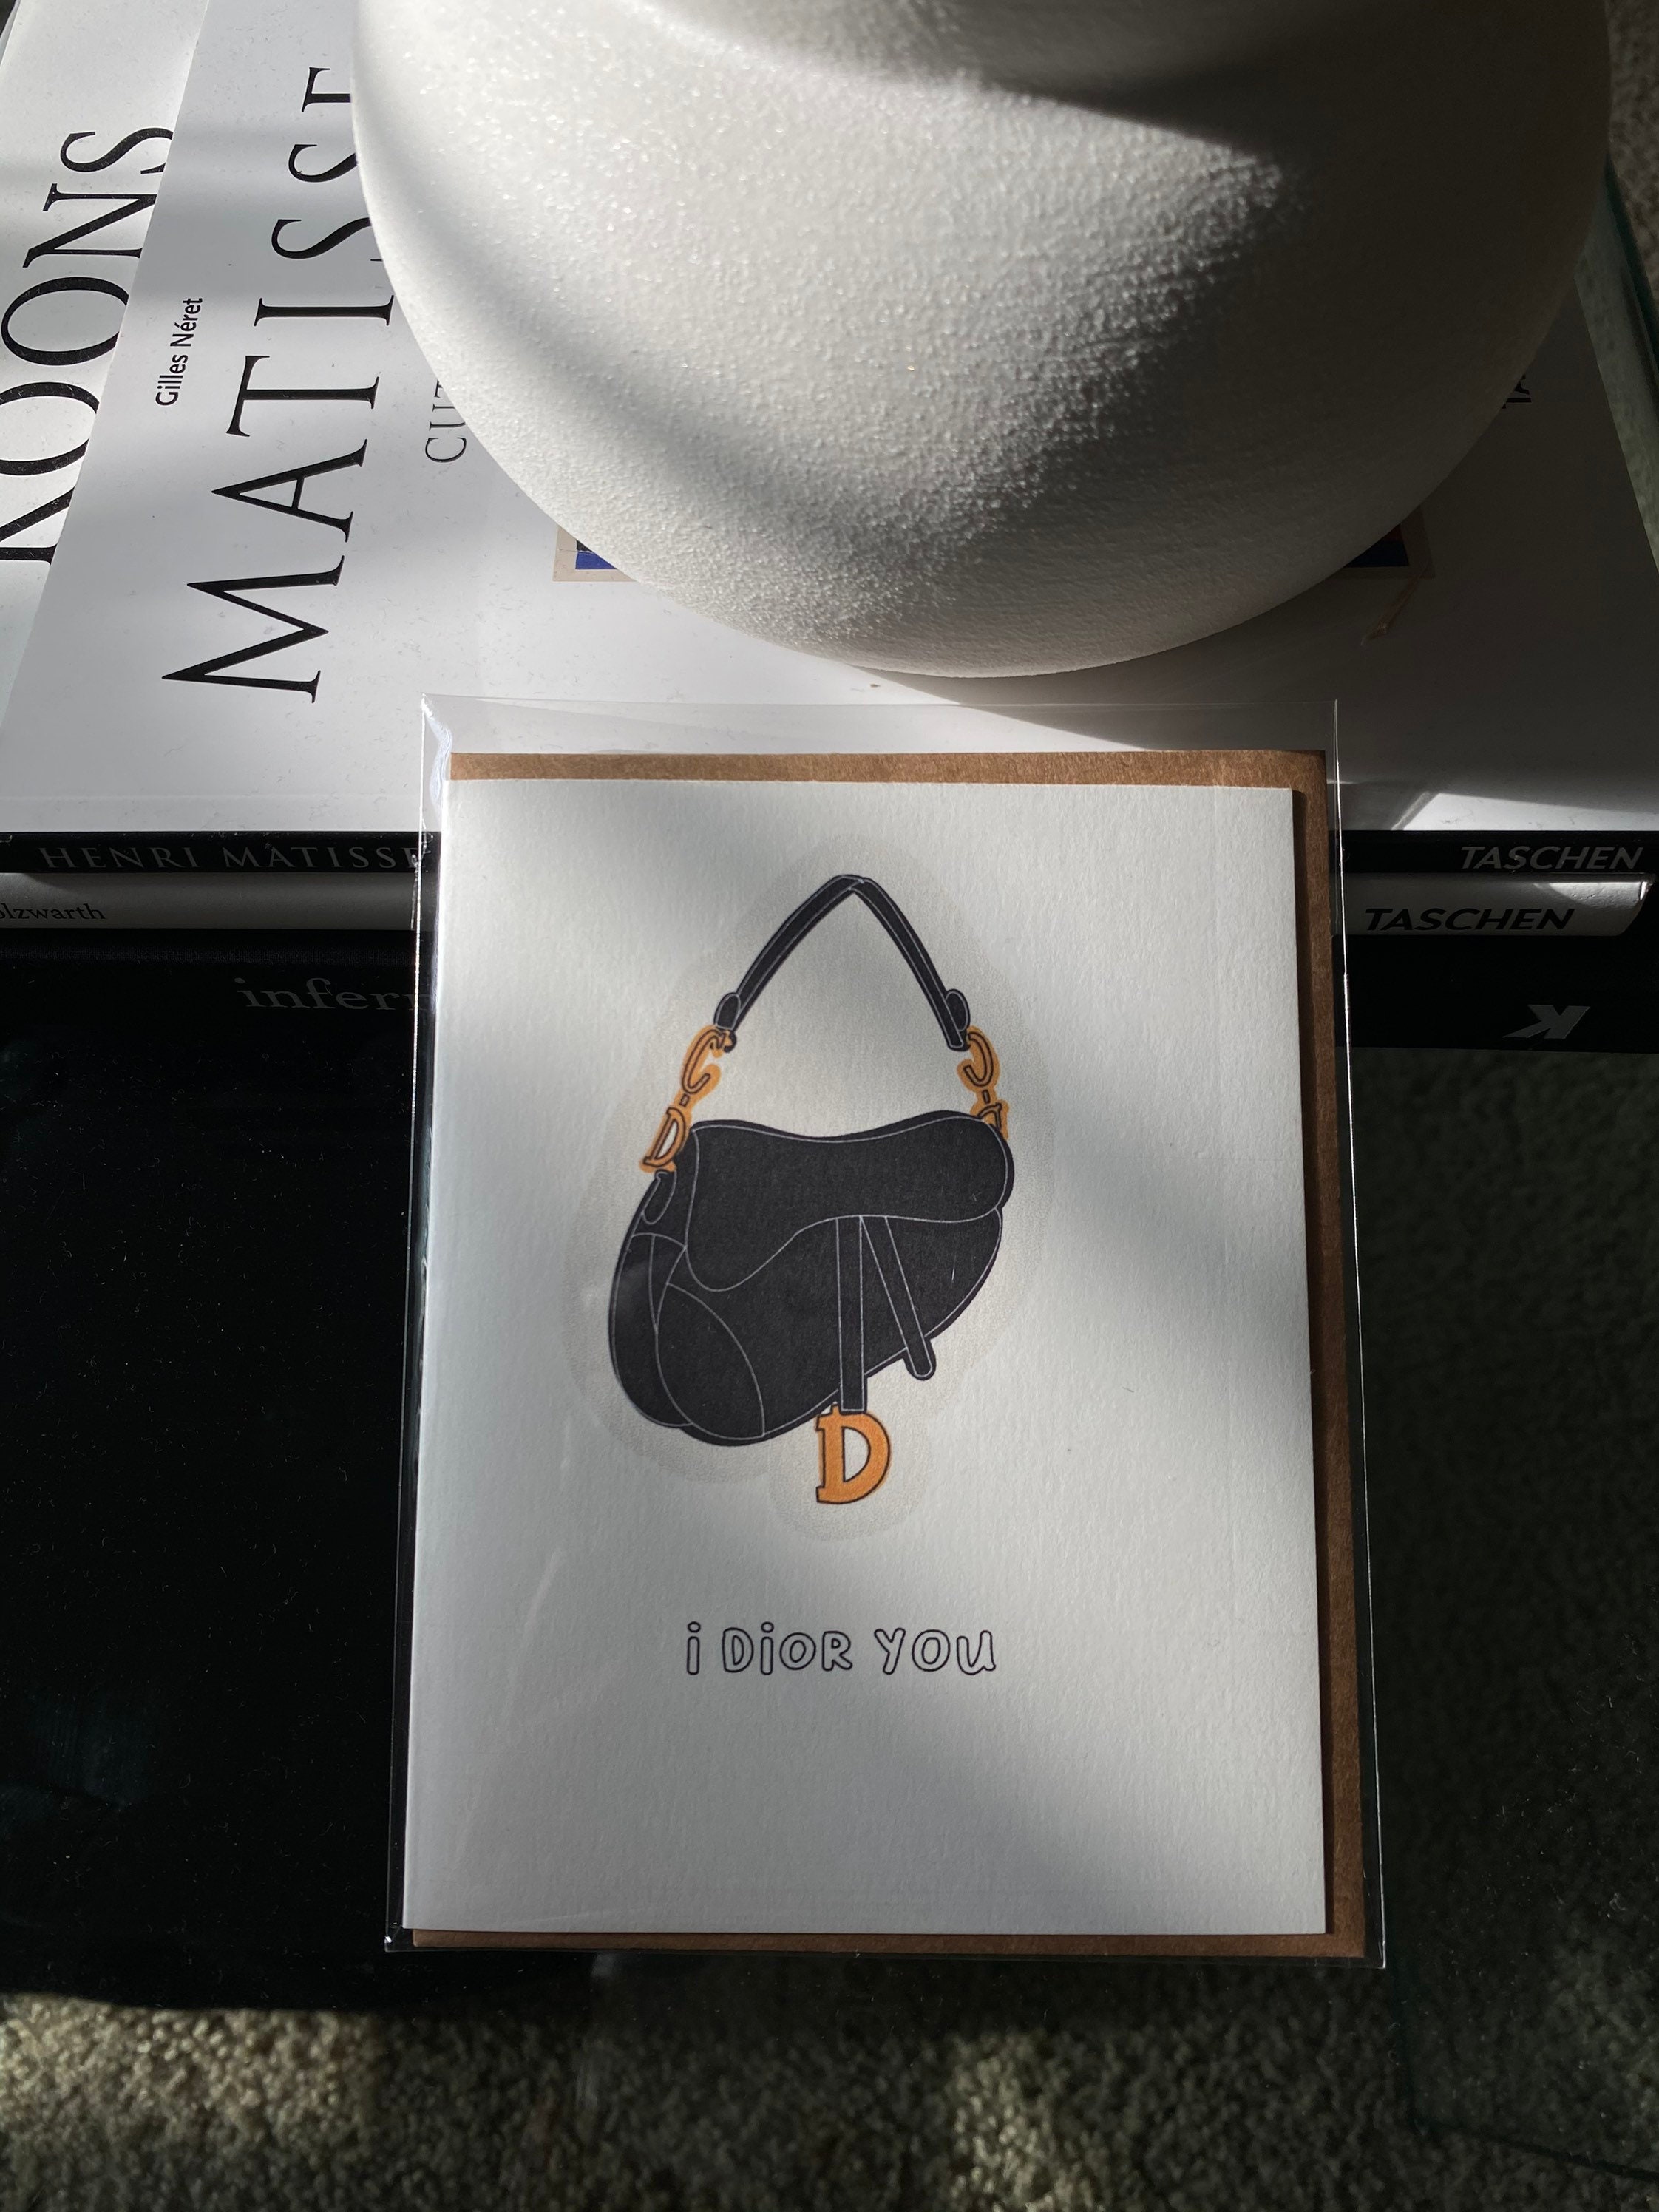 Louis Vuitton collection of 3 Greeting/Thank You Cards with